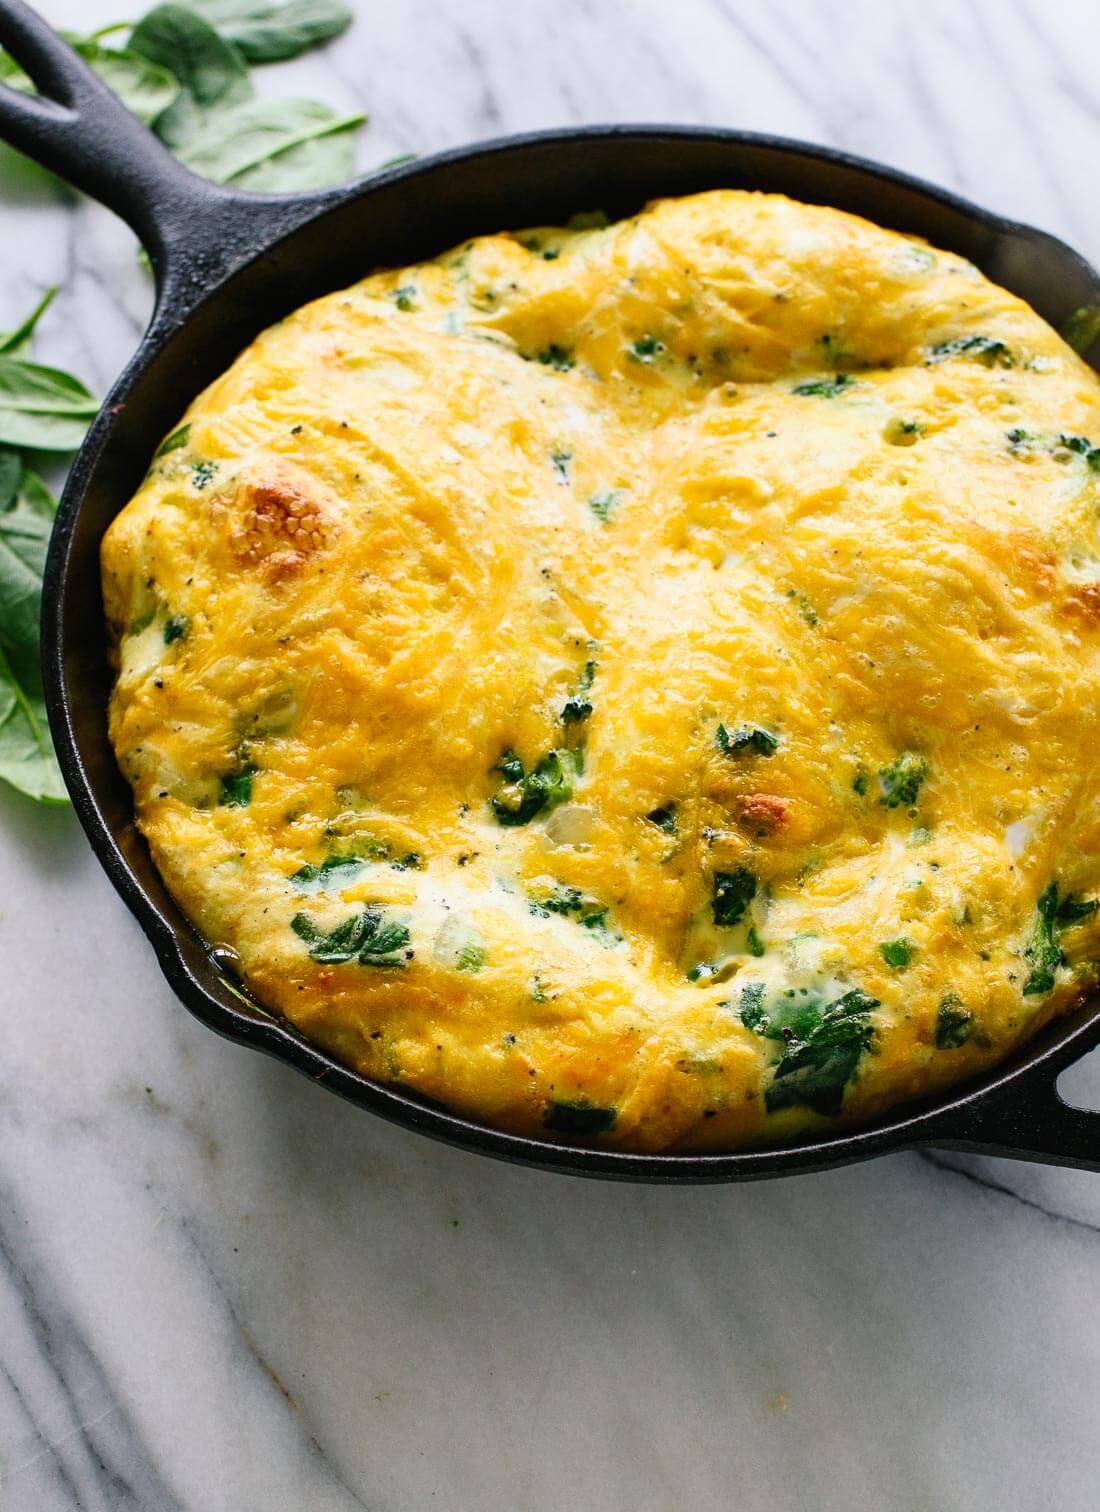 This simple spinach, broccoli and cheddar frittata is packed with veggies!